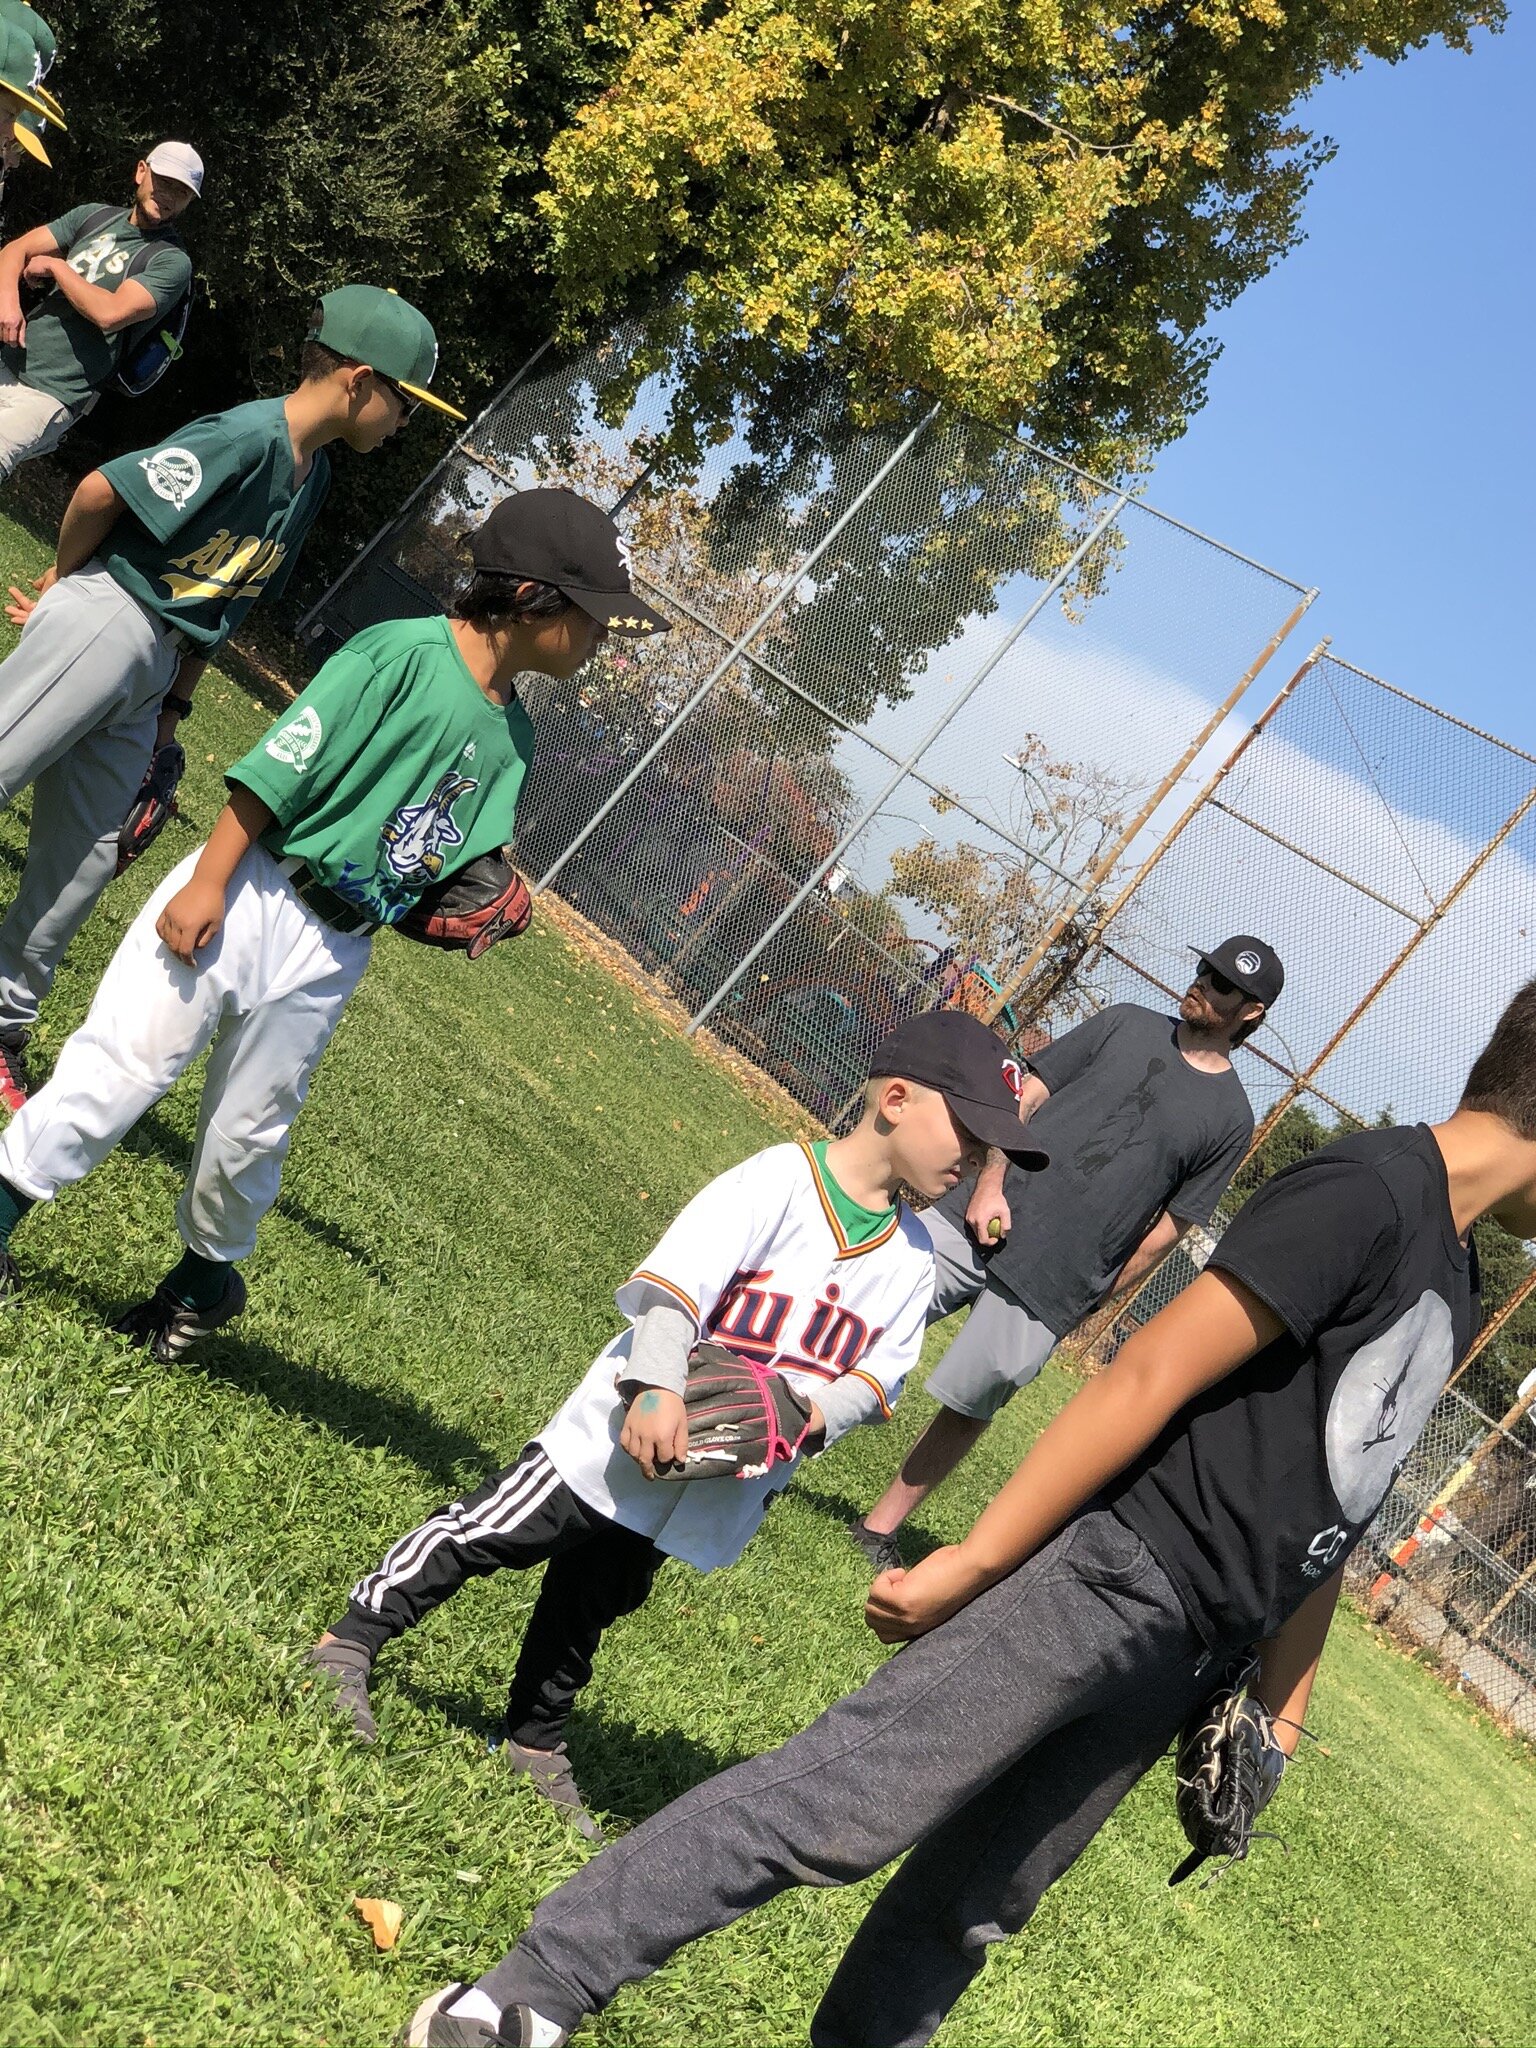 Pitching Drills @ AG Fitness Camp 2019 (Copy)